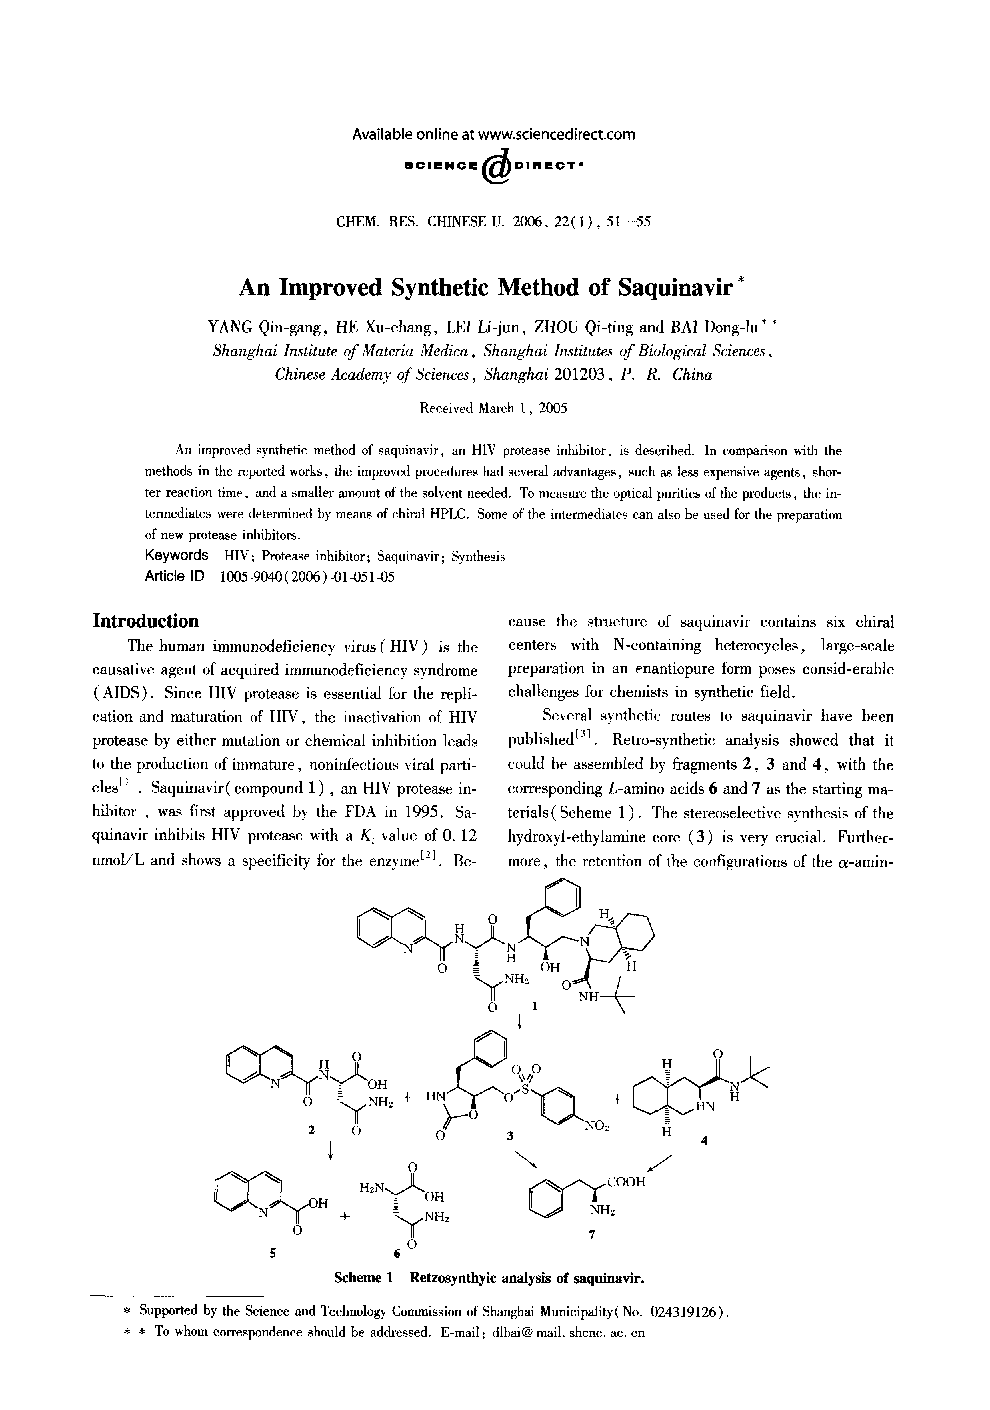 An Improved Synthetic Method of Saquinavir1